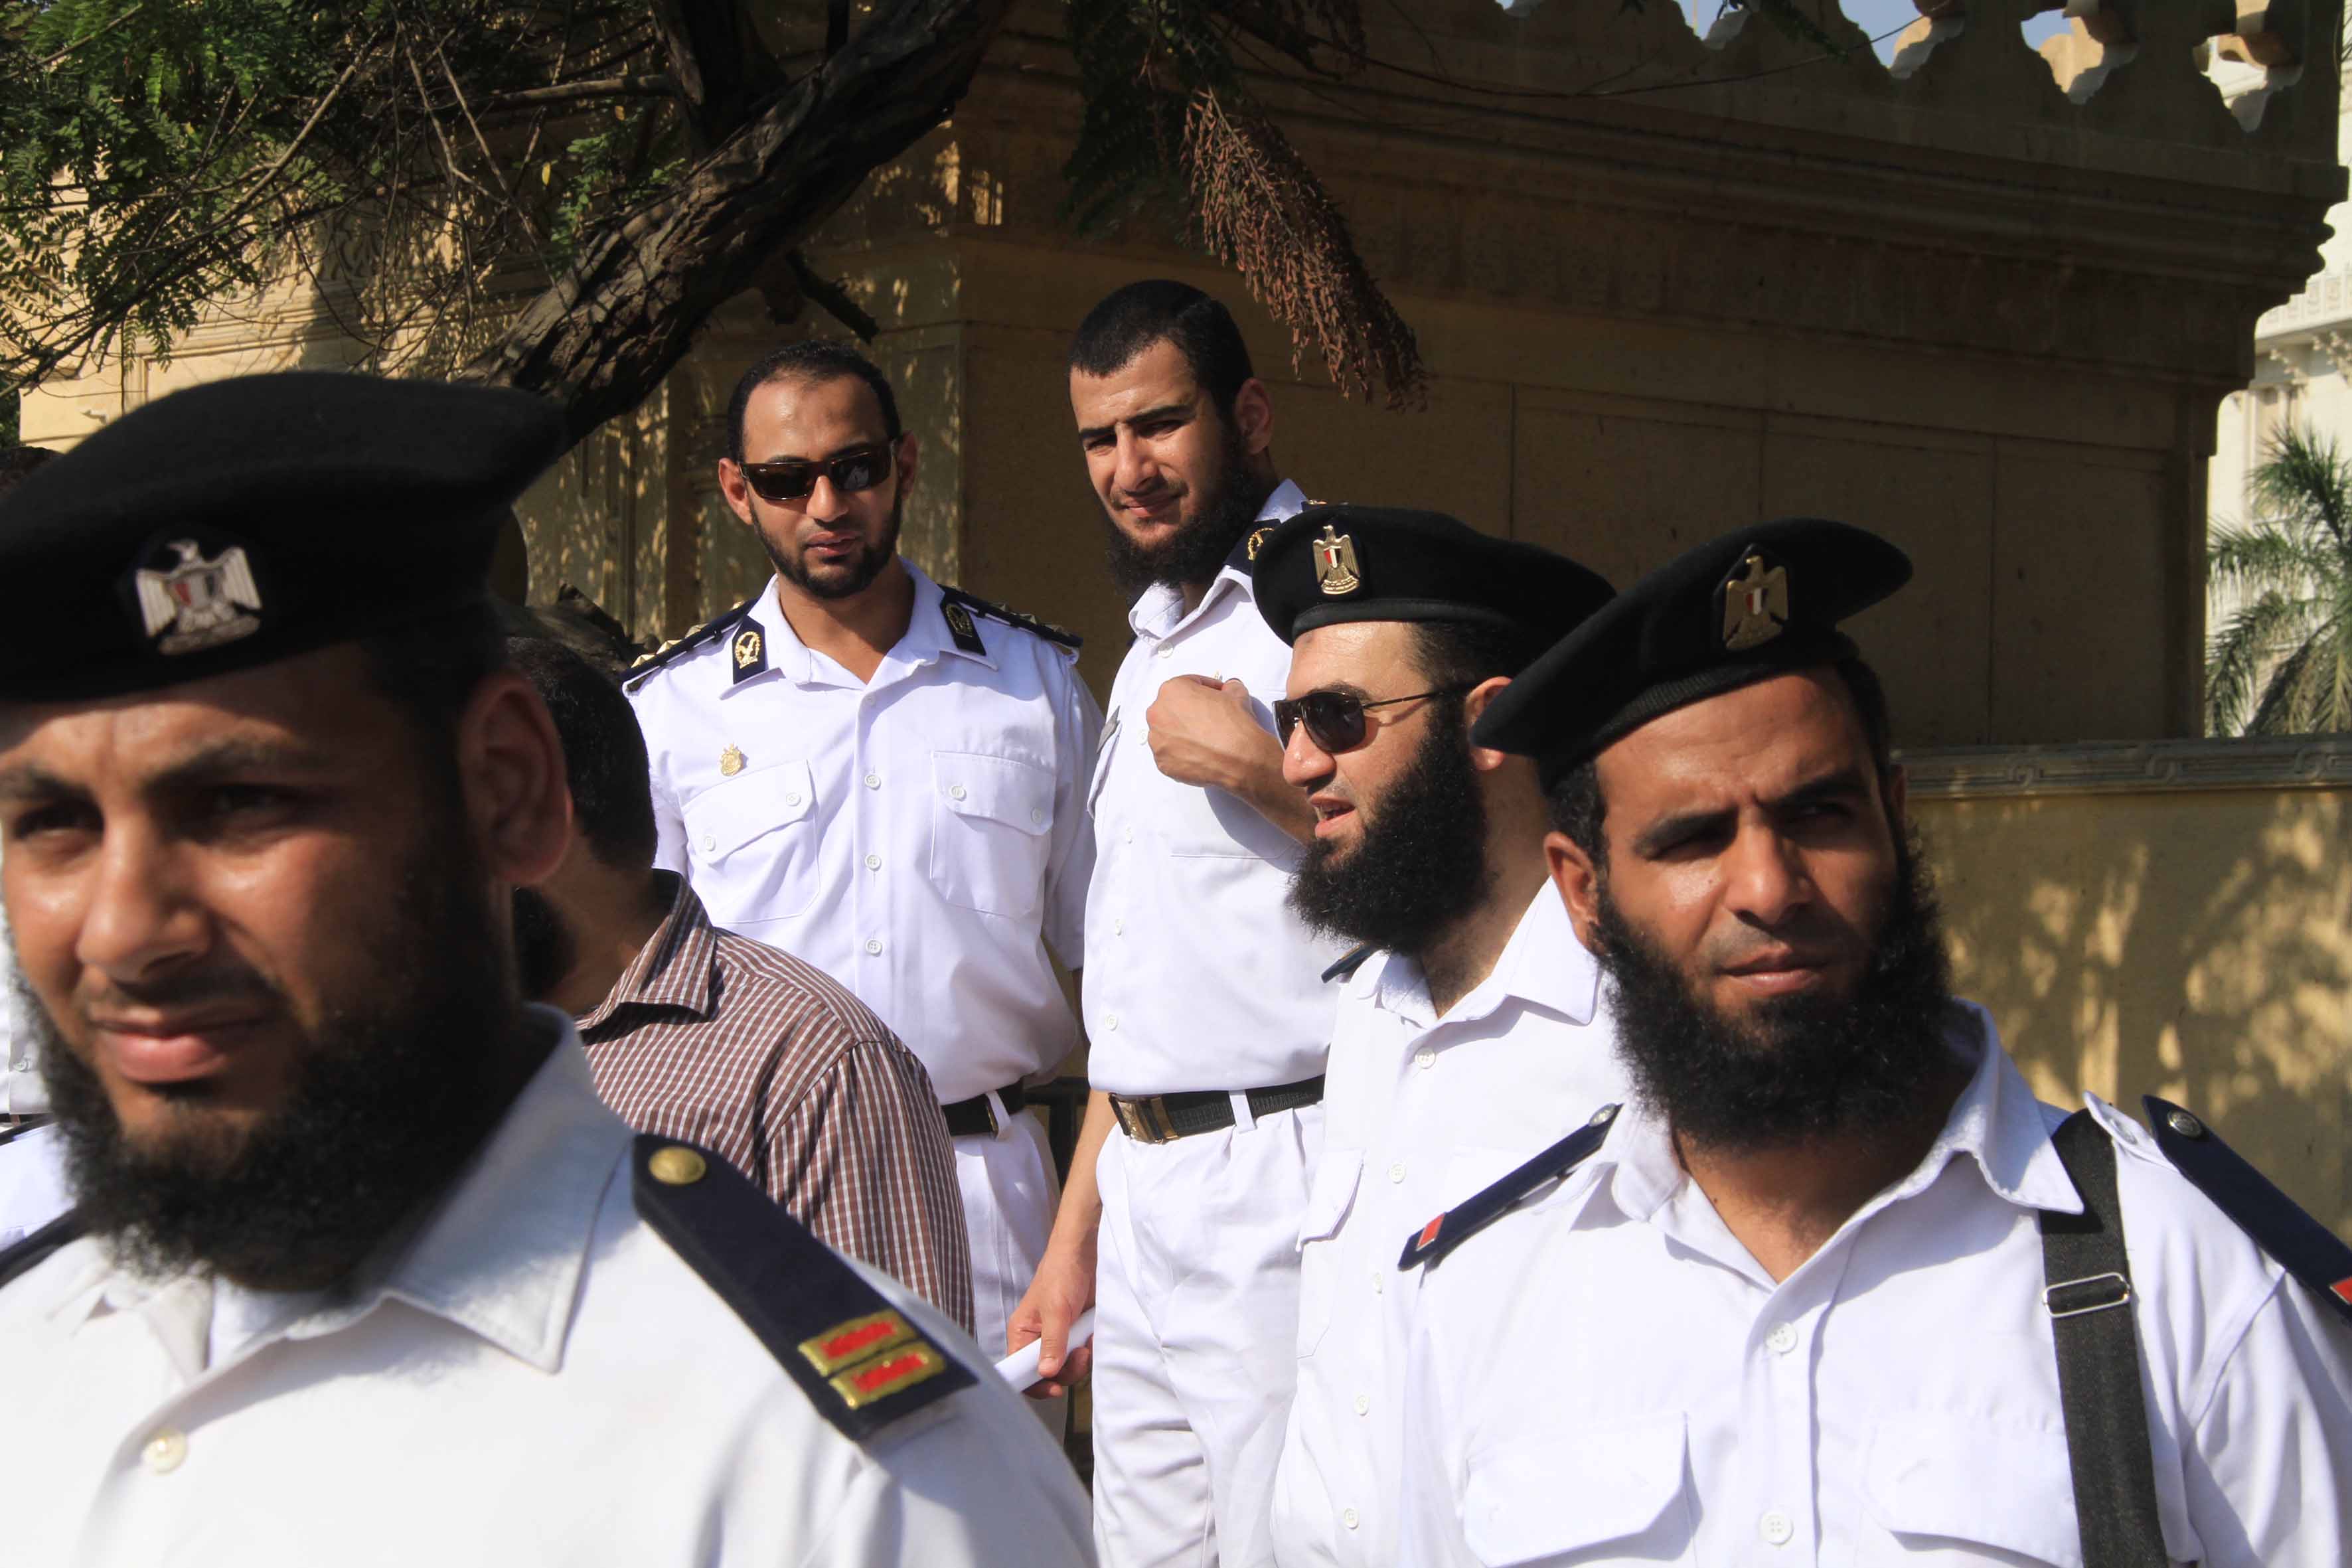 The Interior Ministry said on Wednesday it had not instituted any provisions regarding the bearded police officers (File photo) Photo By Mohamed Omar